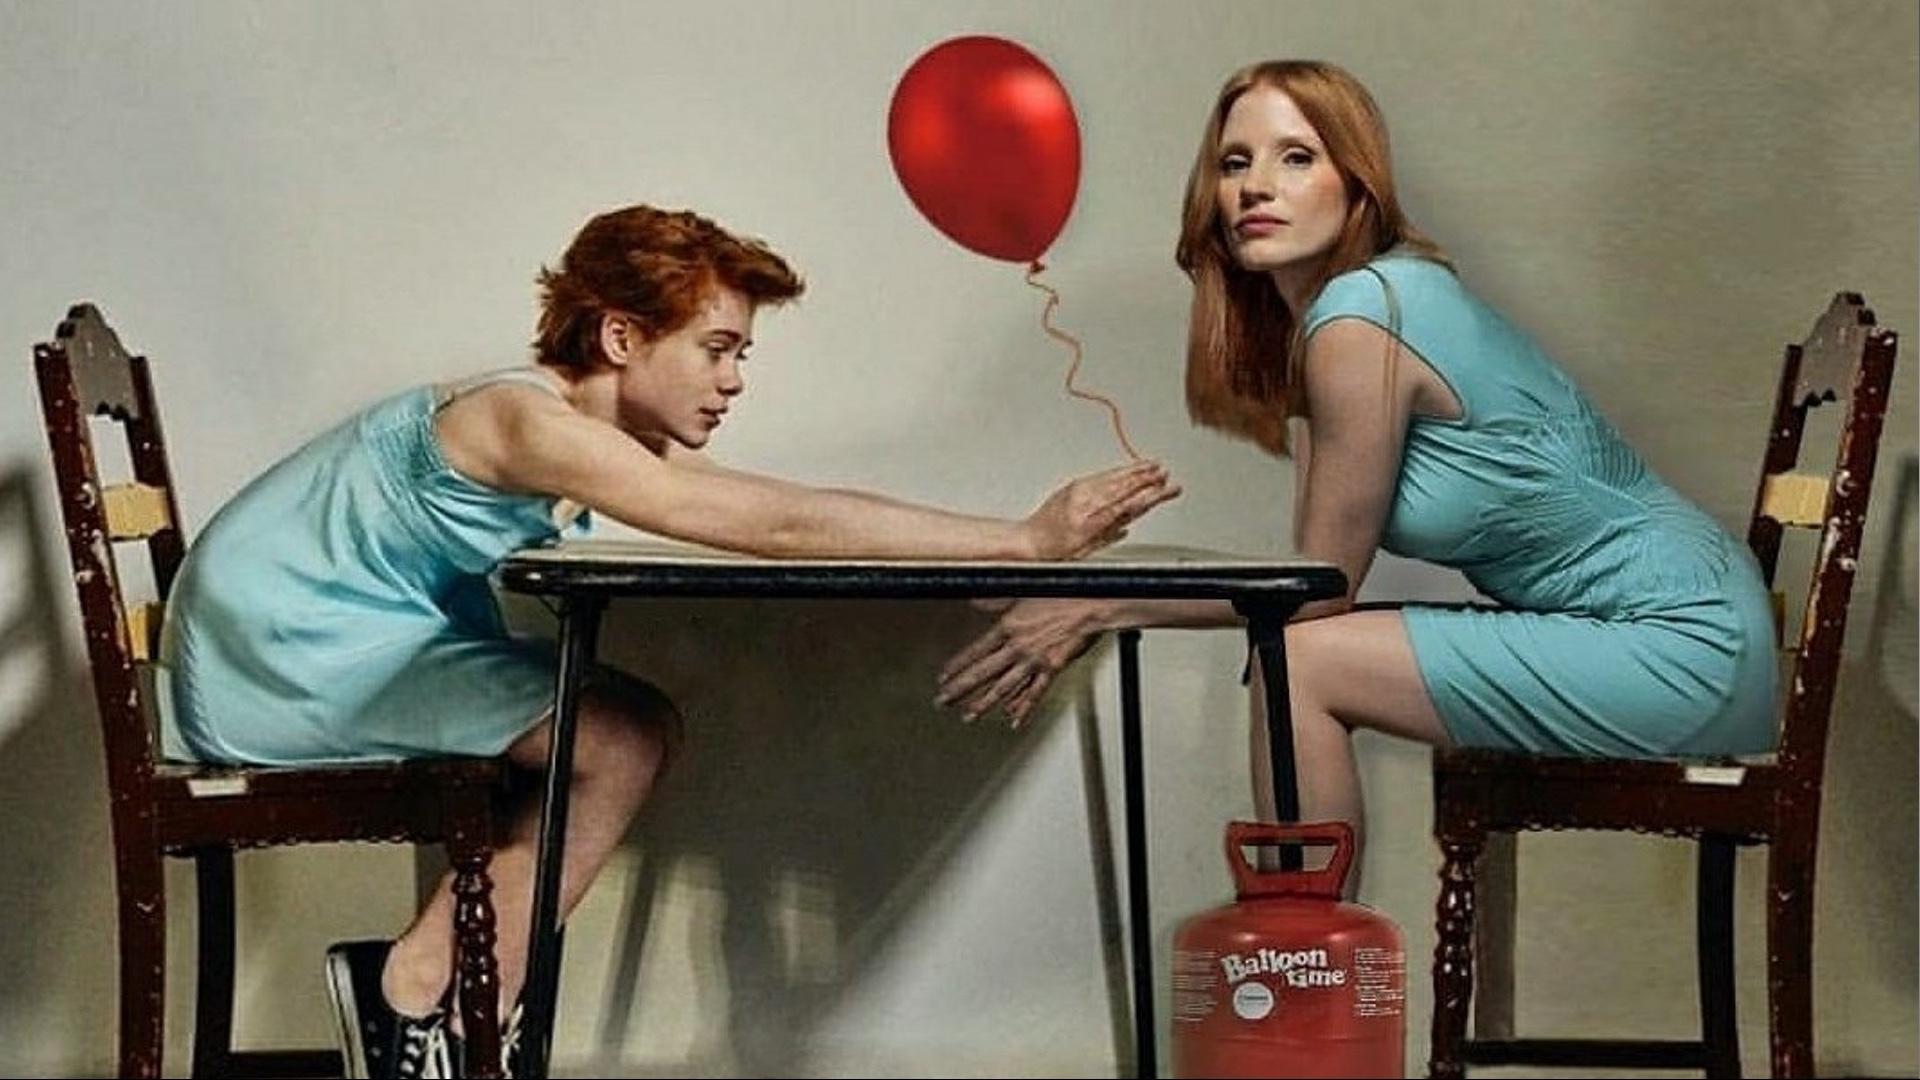 Jessica Chastain is Covered in Blood in This Set Photo From IT